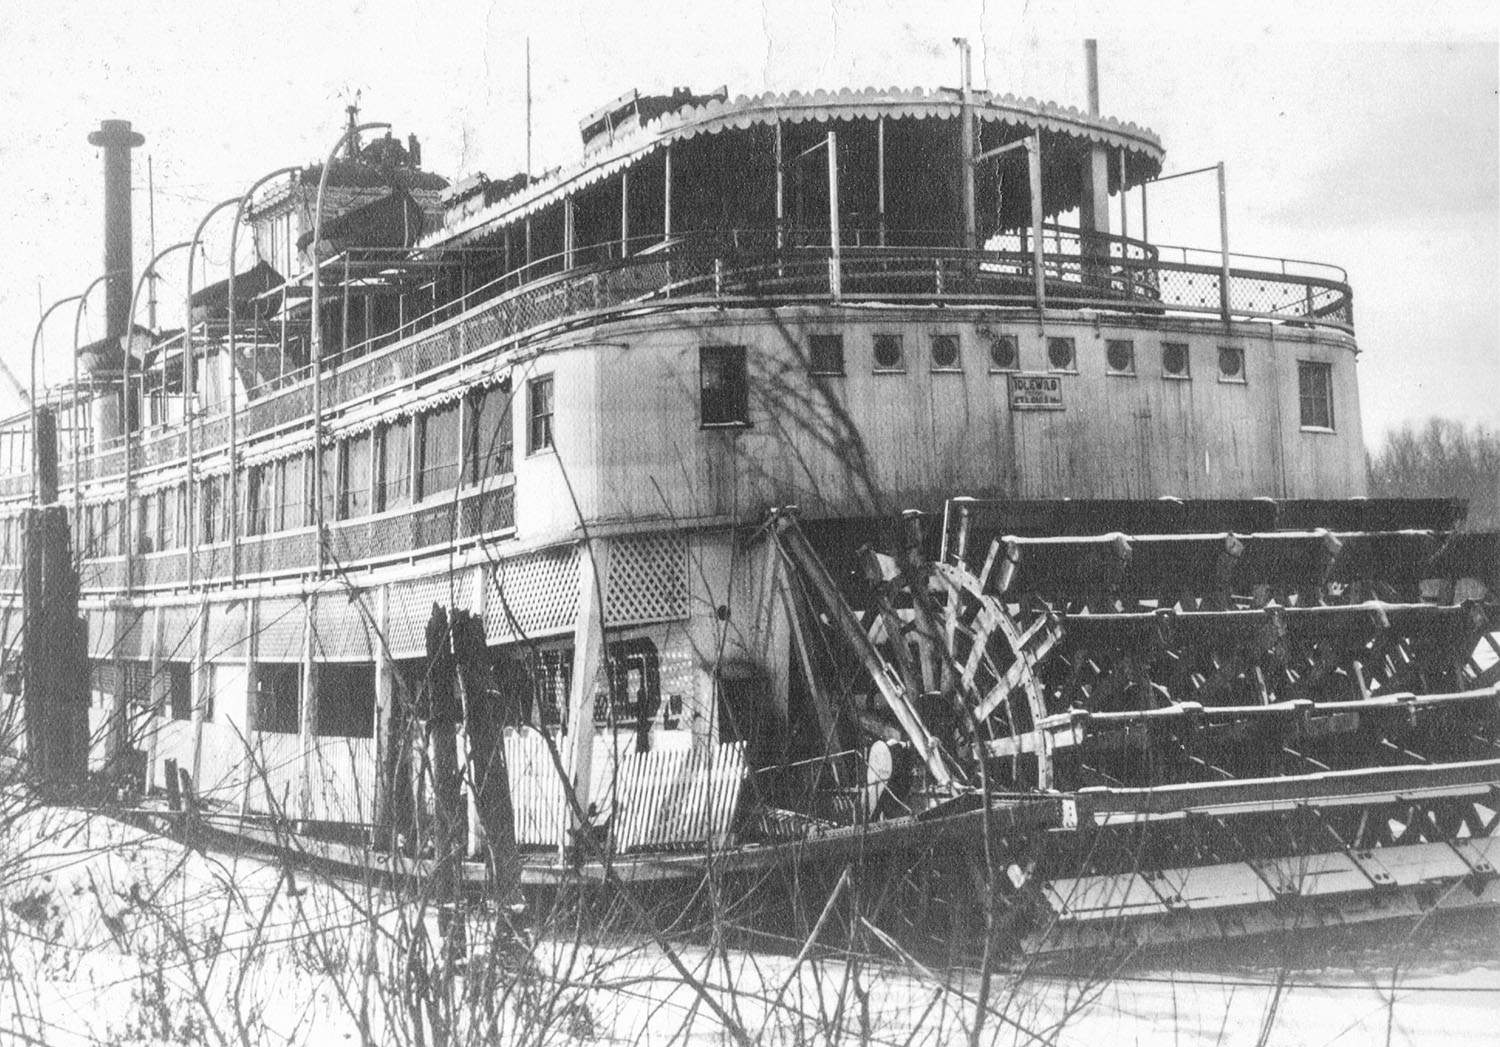 The Str. Idlewild (today the Belle of Louisville) frequently wintered at Alton Slough. (Keith Norrington collection)